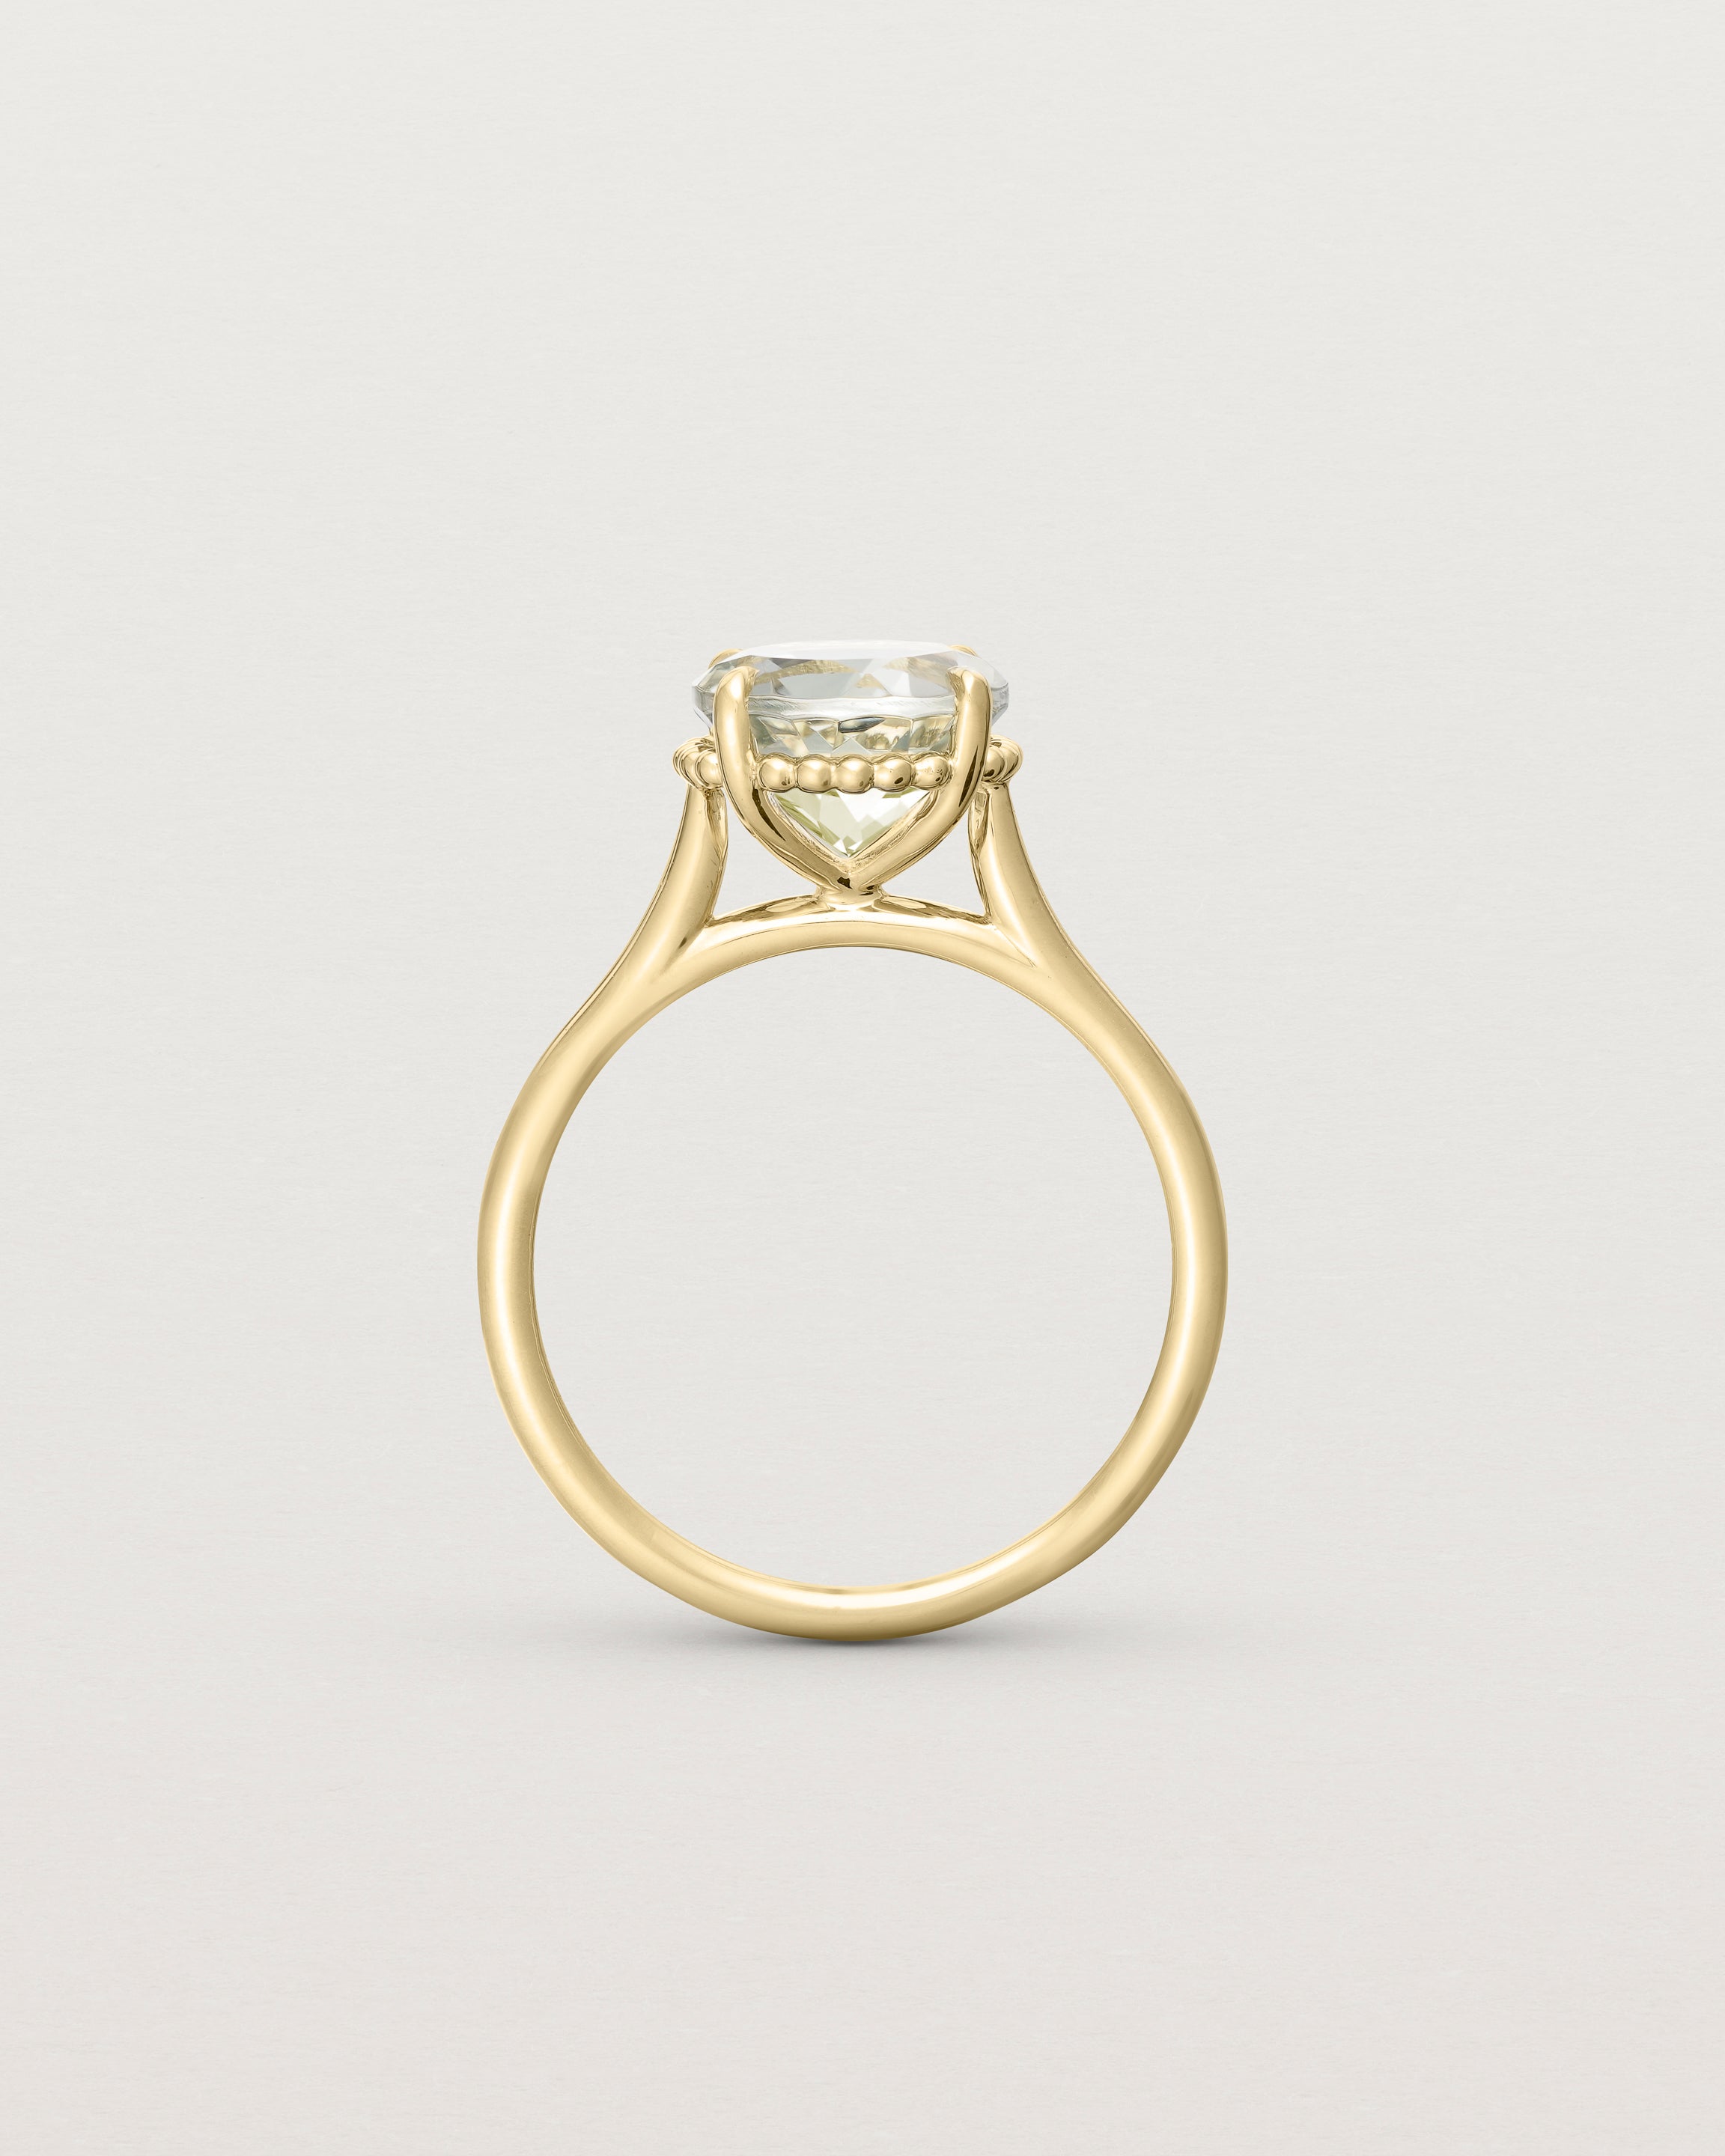 Standing view of the Thea Round Solitaire | Green Amethyst in yellow gold.